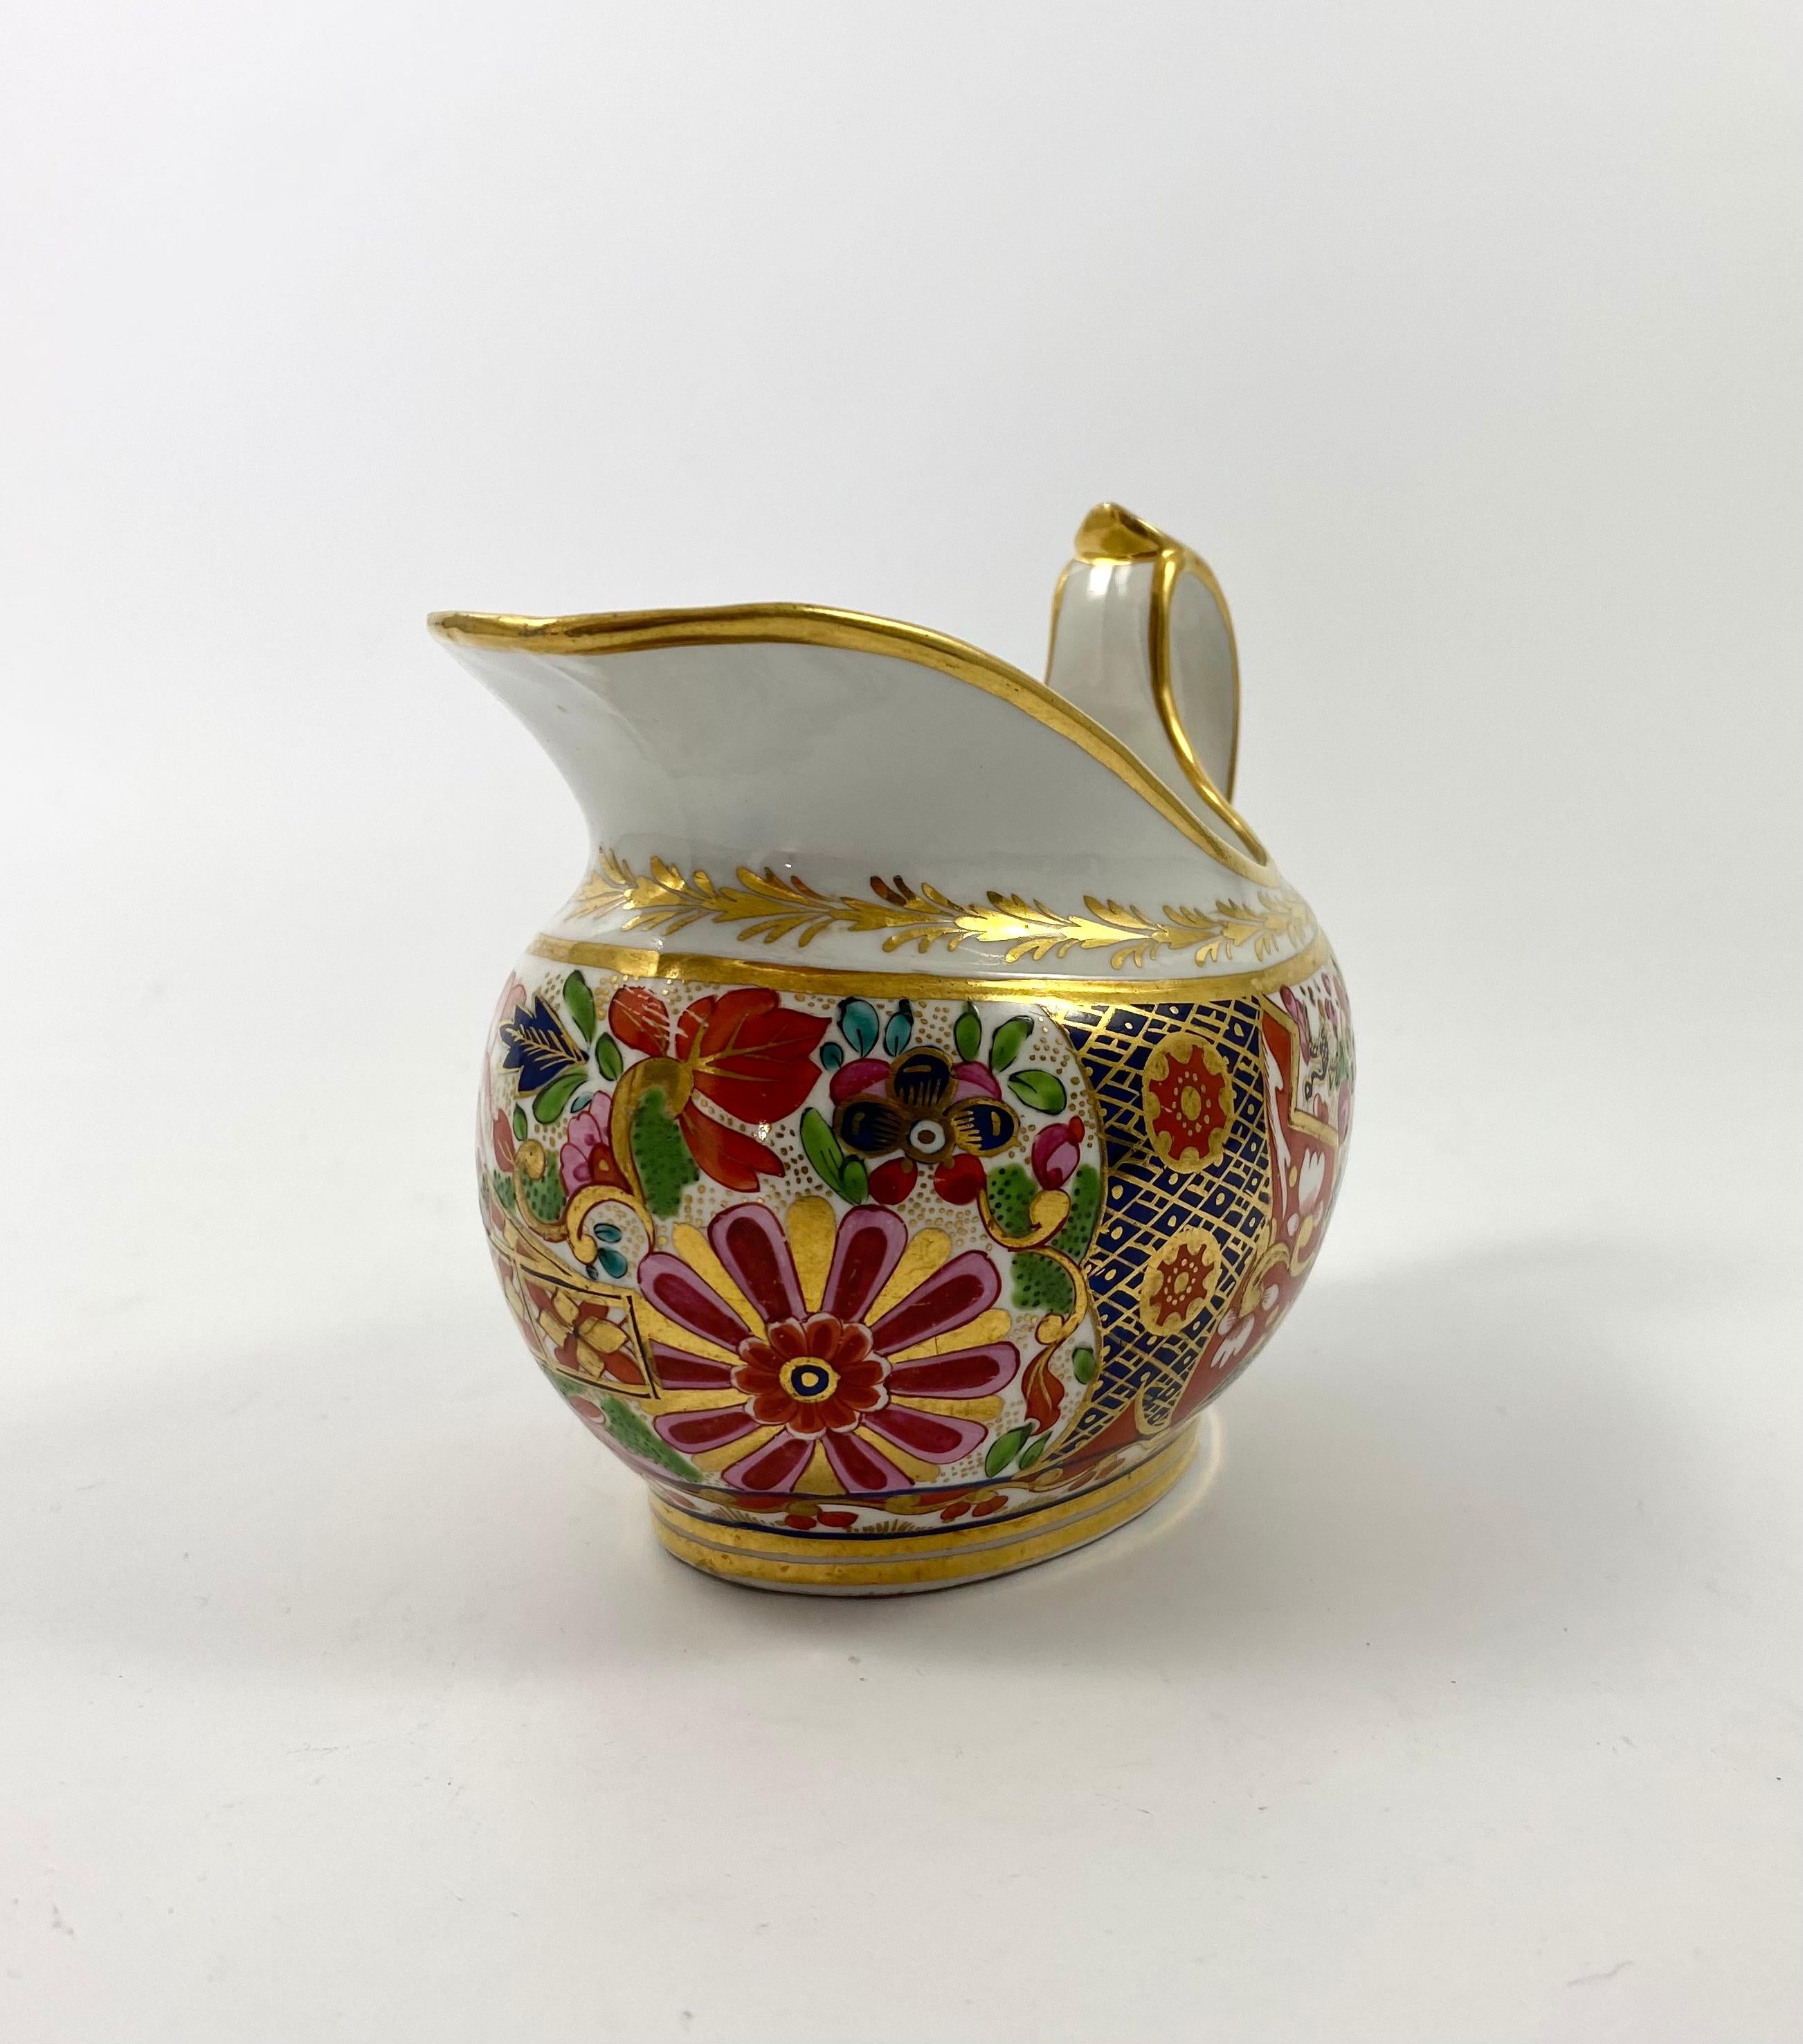 Barr, Flight and Barr Worcester porcelain cream jug, c. 1815. Finely hand painted in vibrant enamels, and gilding, with a rich Imari pattern, of a profusion of flowers growing in a garden. The spout with a stylised flowerhead in gilt.
Impressed